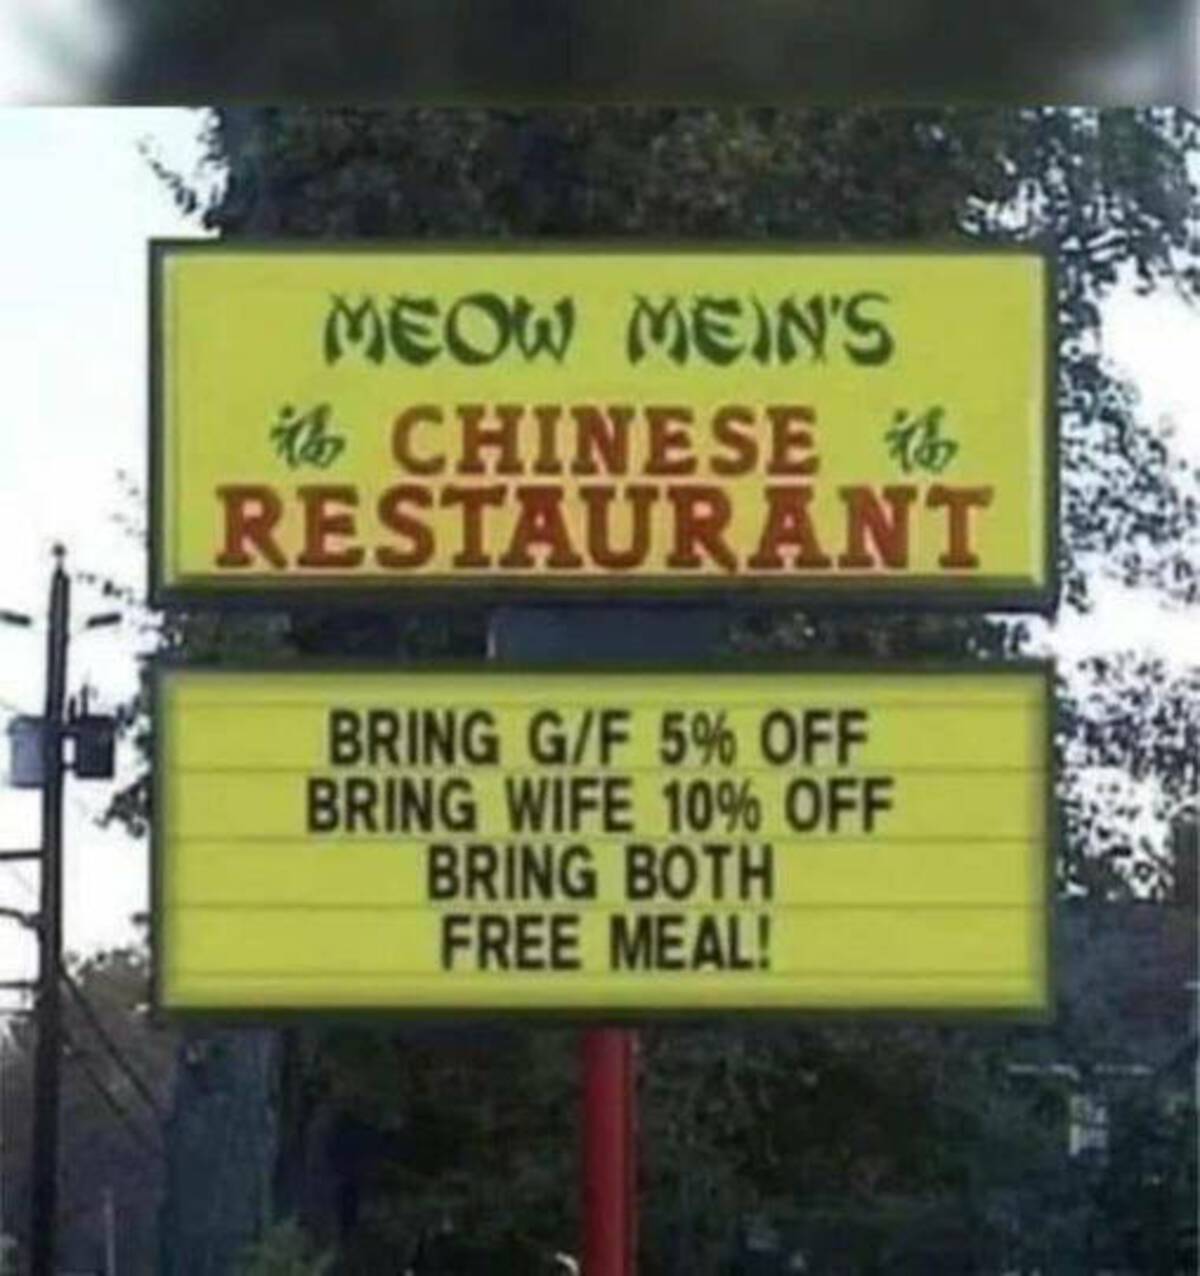 street sign - Meow Mein'S Chinese Restaurant Bring GF 5% Off Bring Wife 10% Off Bring Both Free Meal!